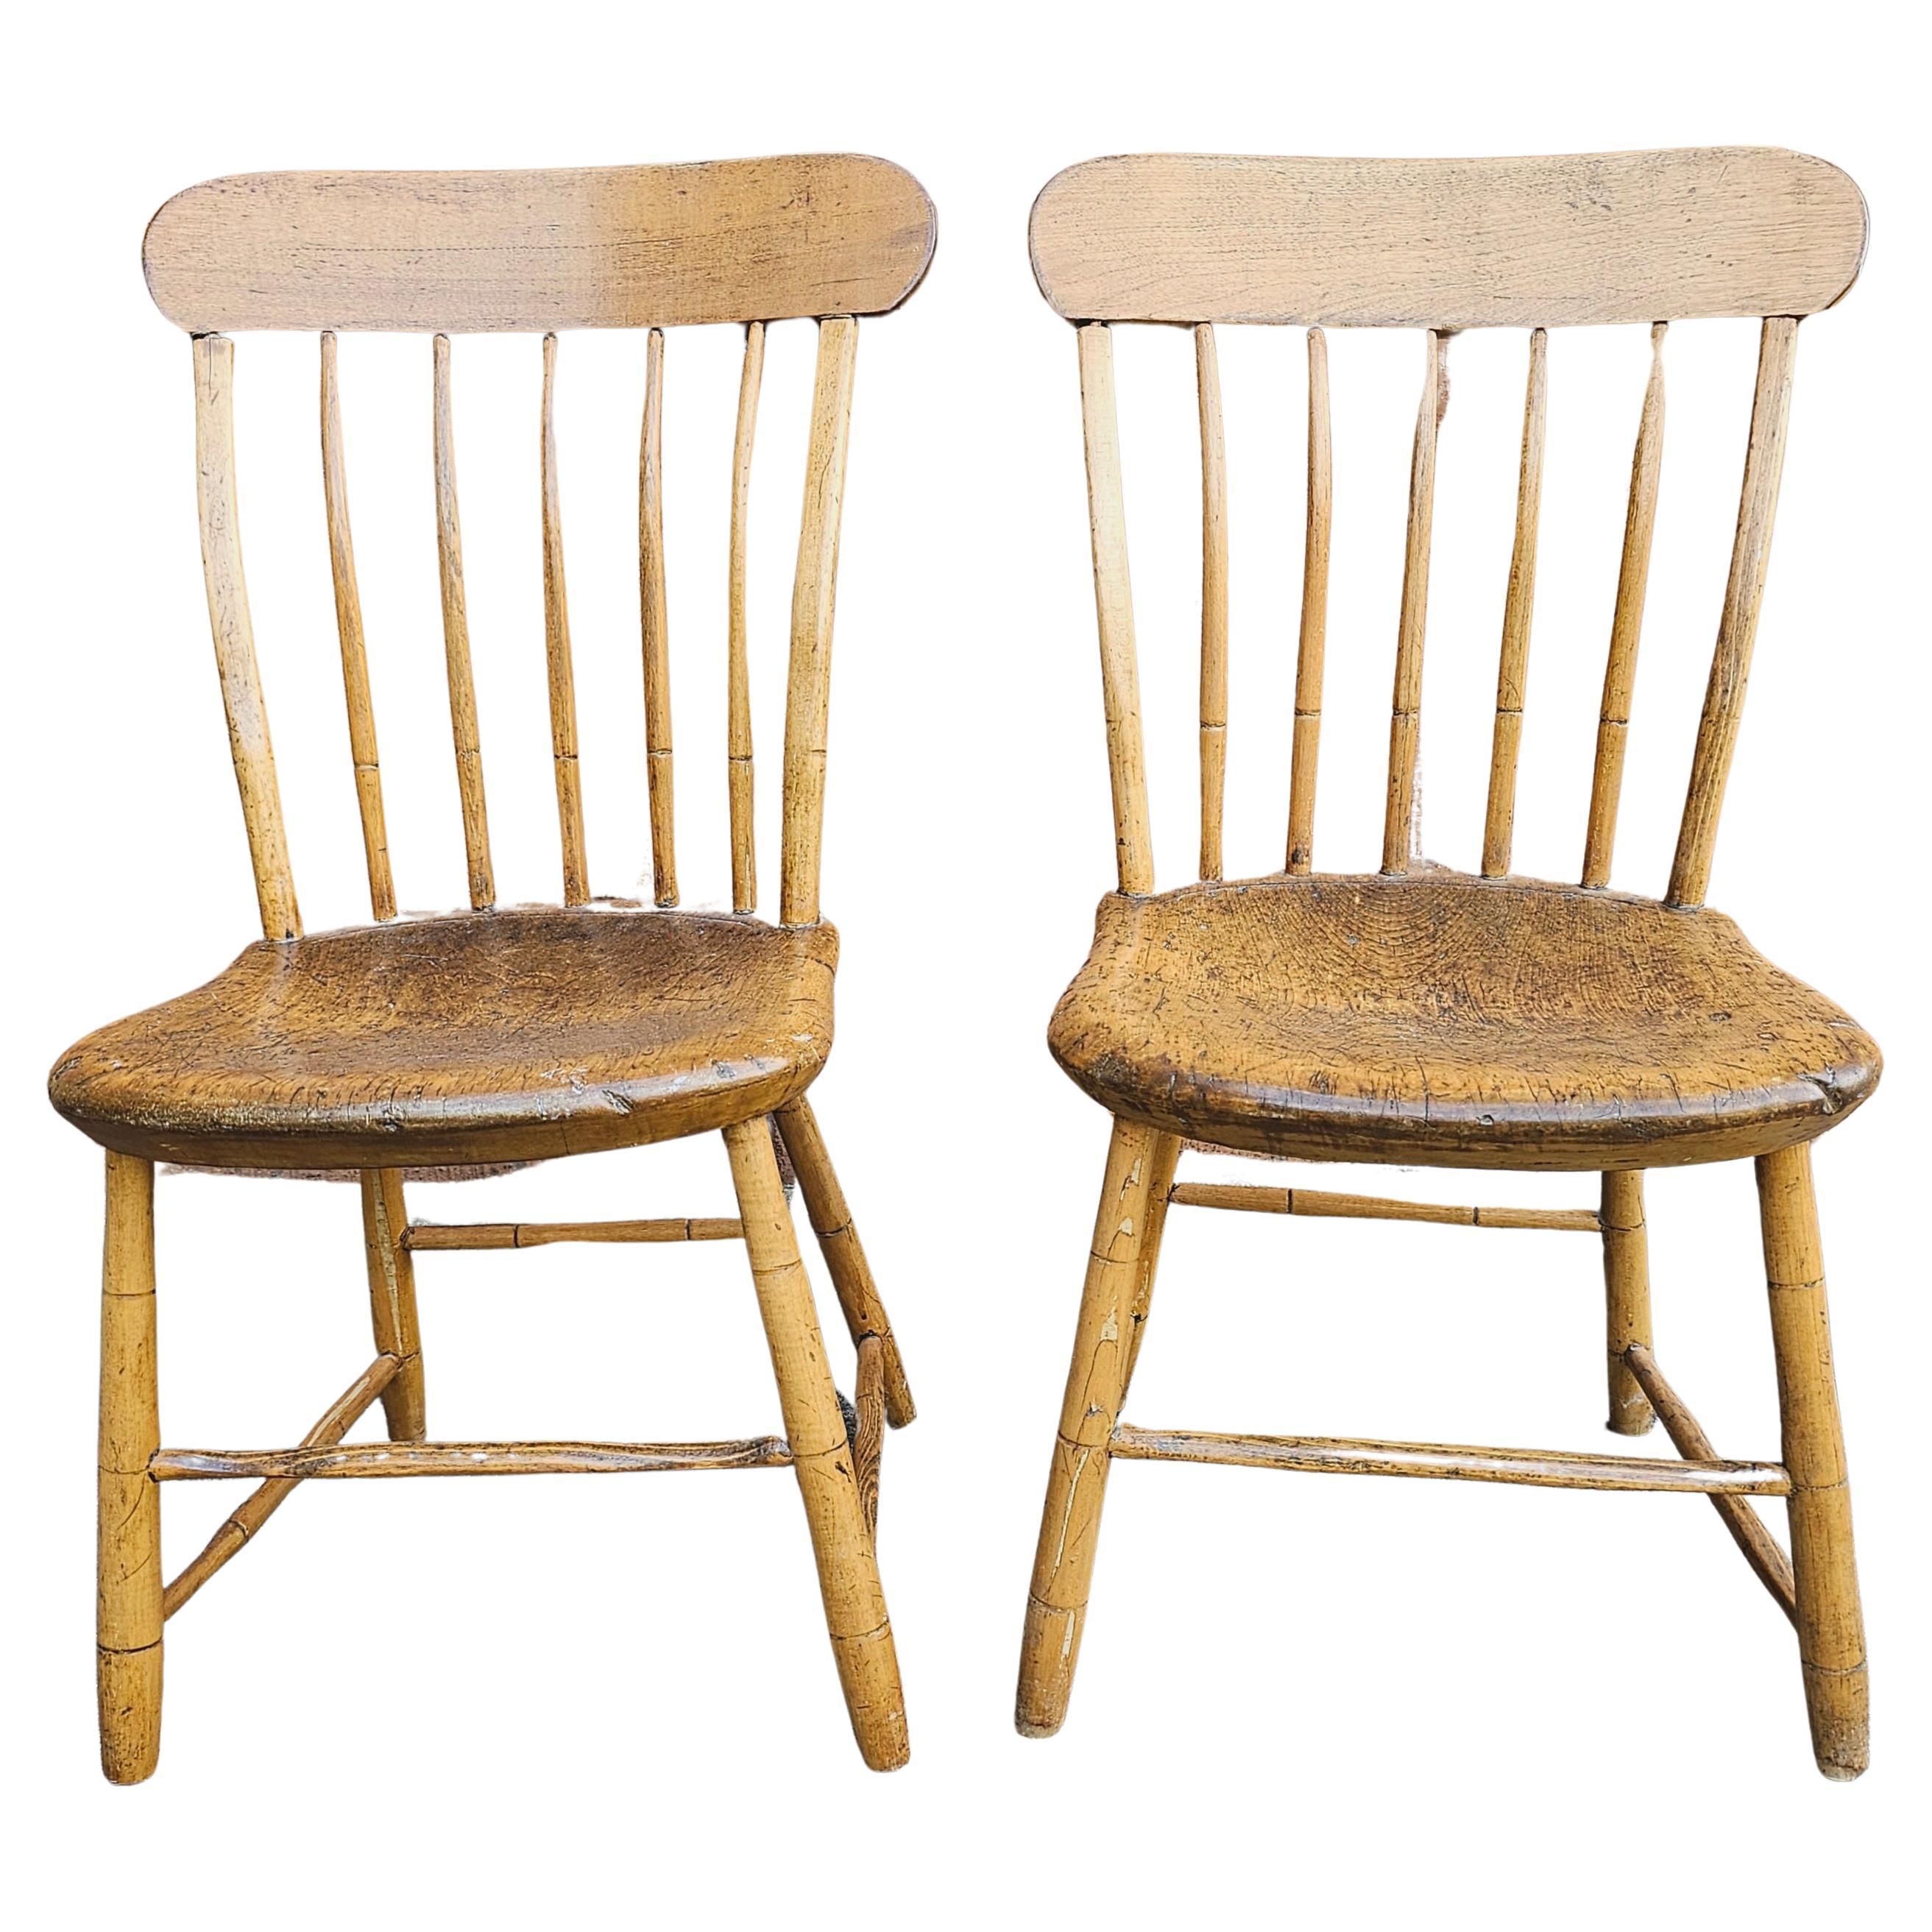 Pair of Early American Patinated Maple Plank Chairs, Circa Mid 19th Century